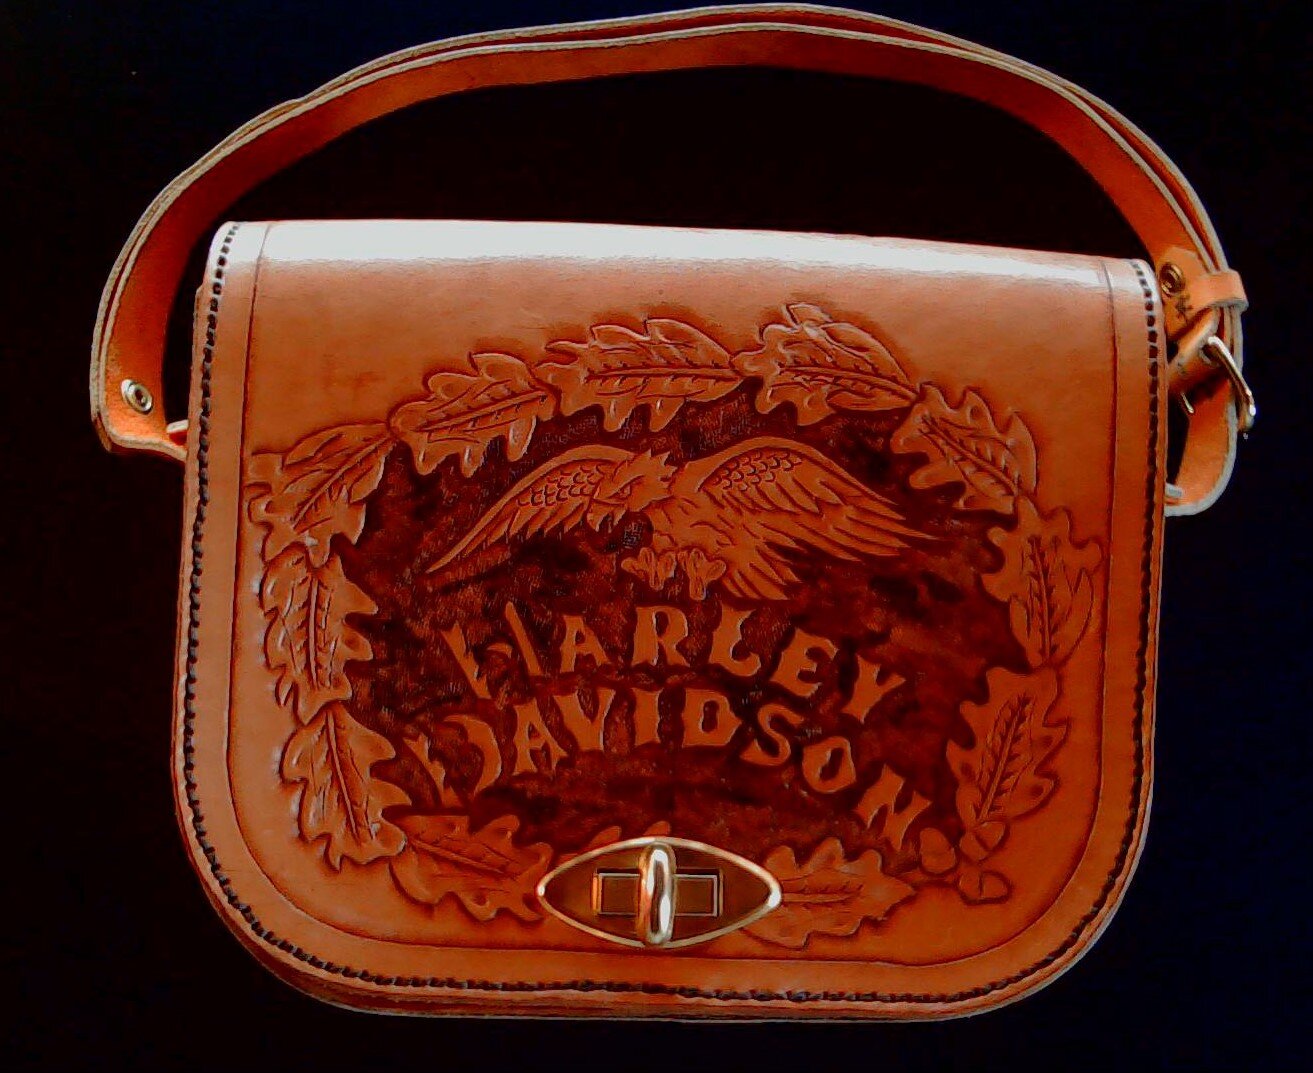 Authentic Harley-Davidson leather purse | Harley davidson purses, Leather  purses, Harley davidson